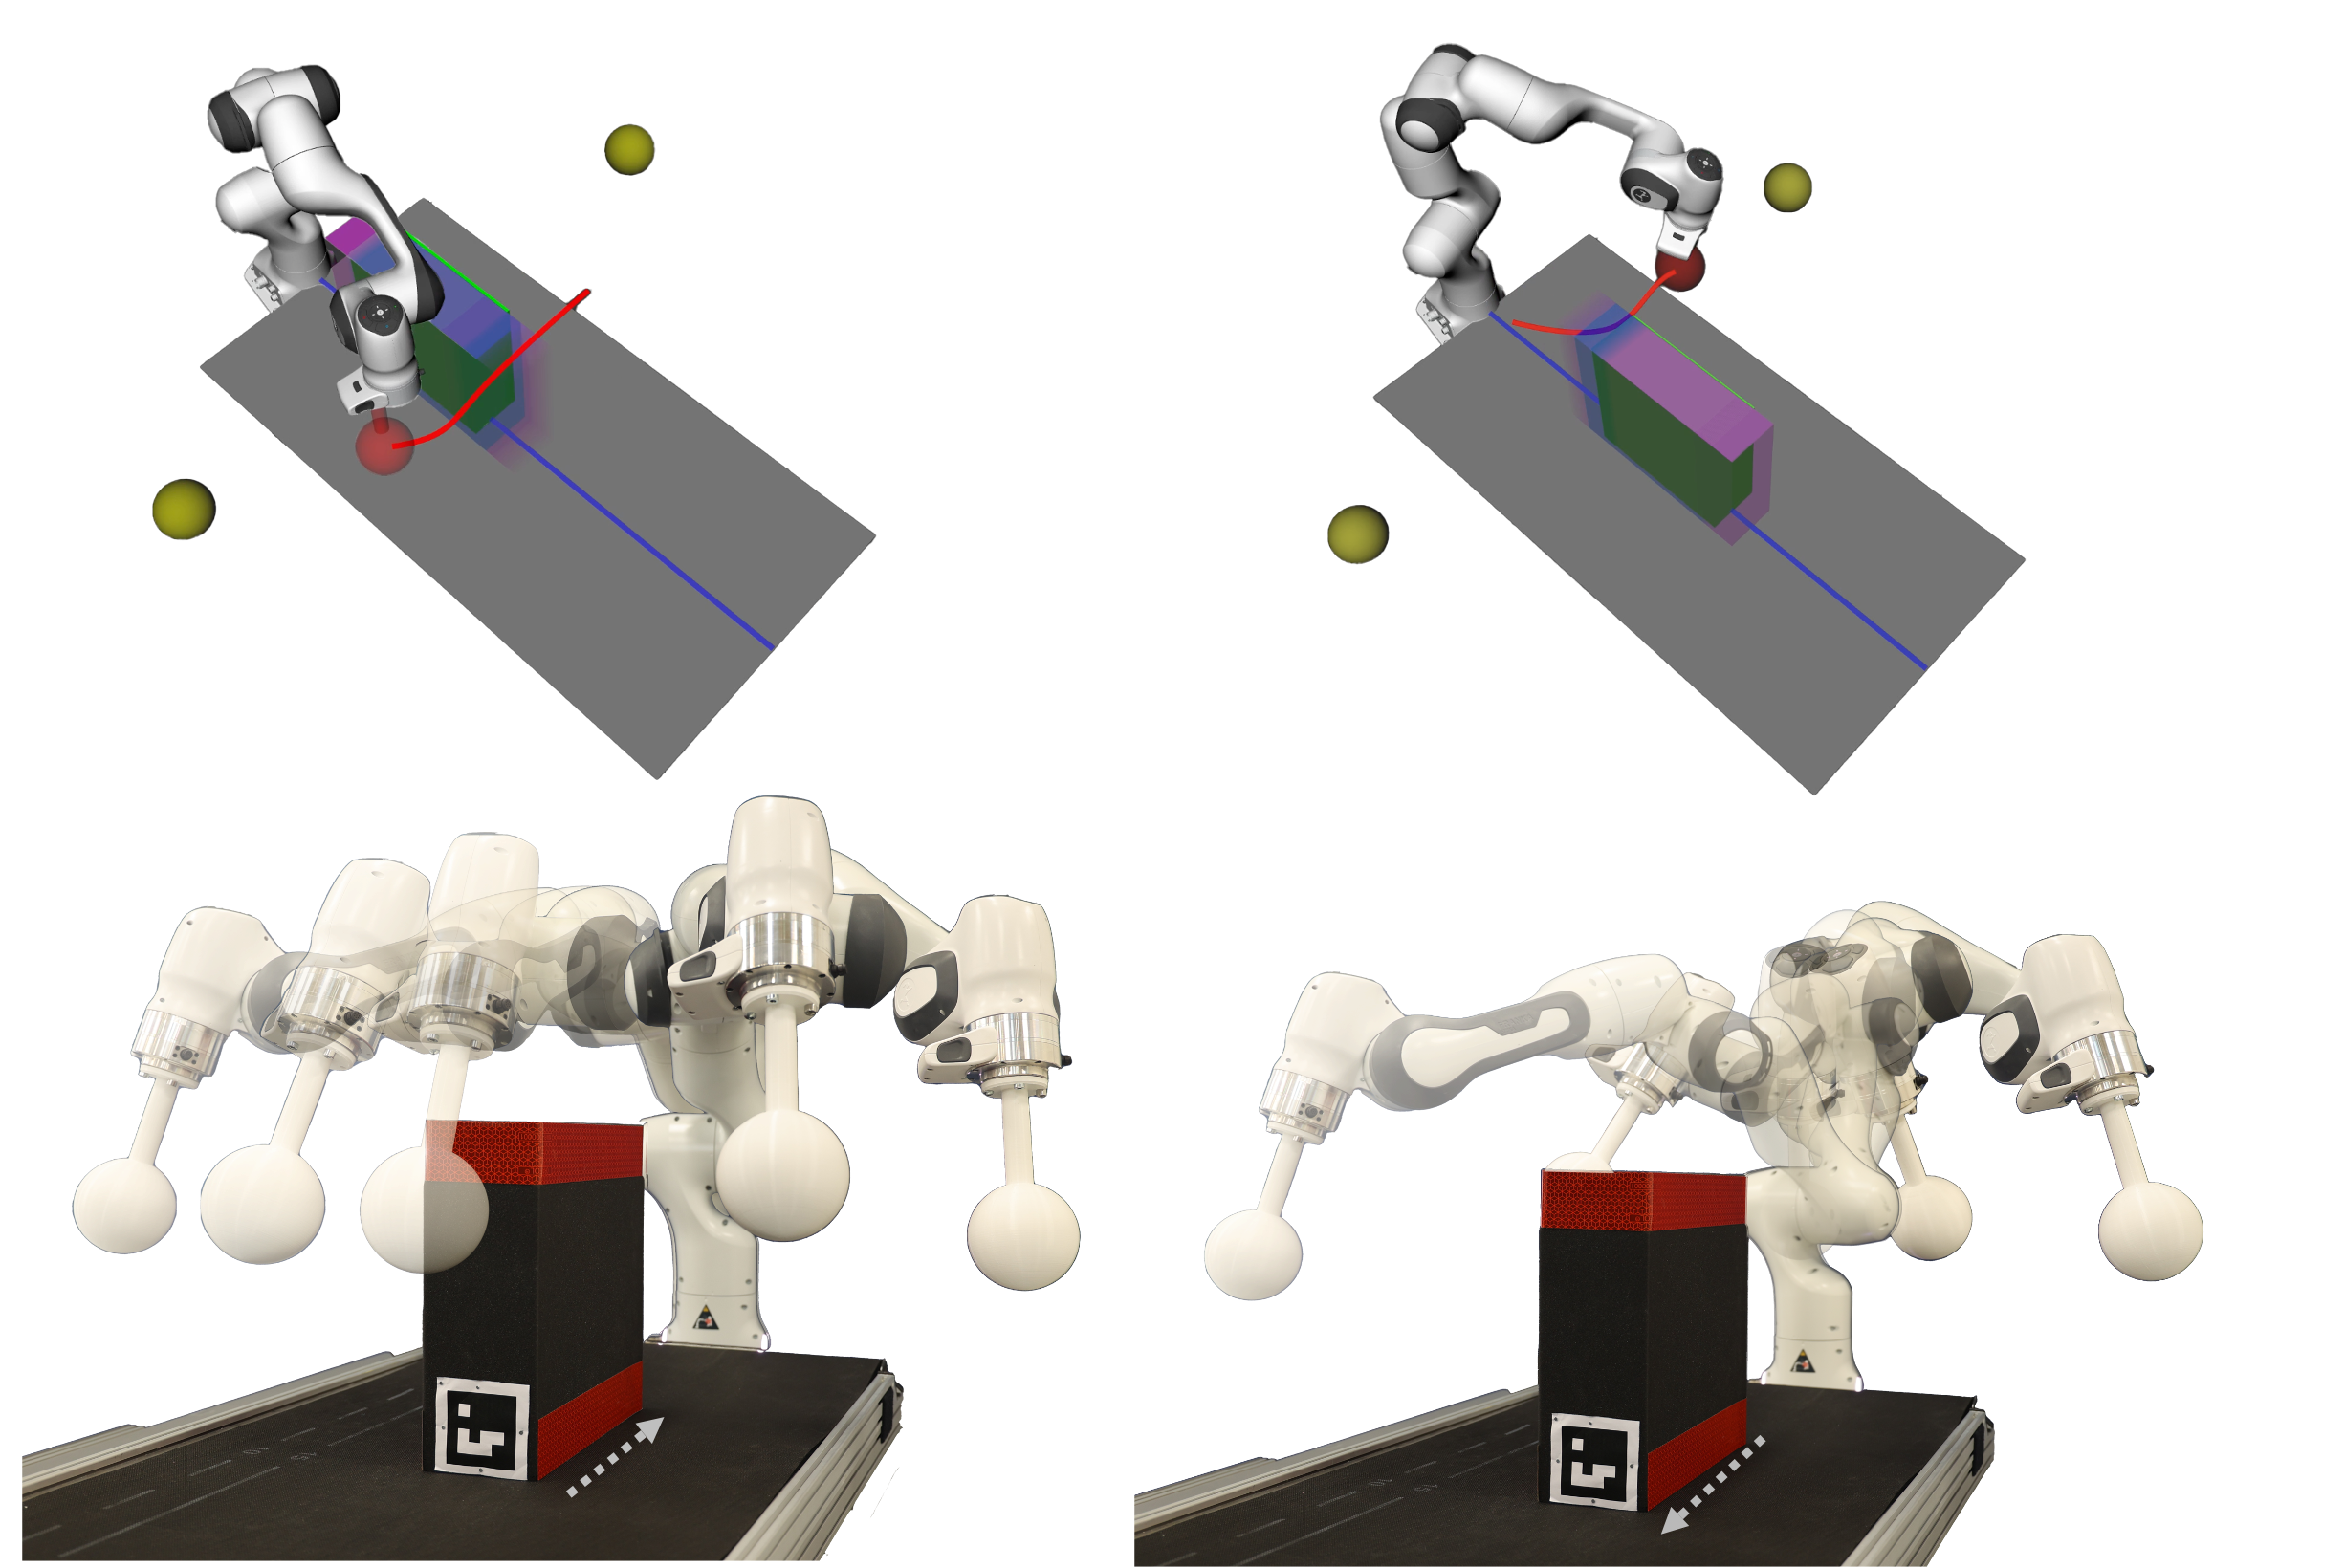 CC-VPSTO: Chance-Constrained Via-Point-based Stochastic Trajectory Optimisation for Safe and Efficient Online Robot Motion Planning